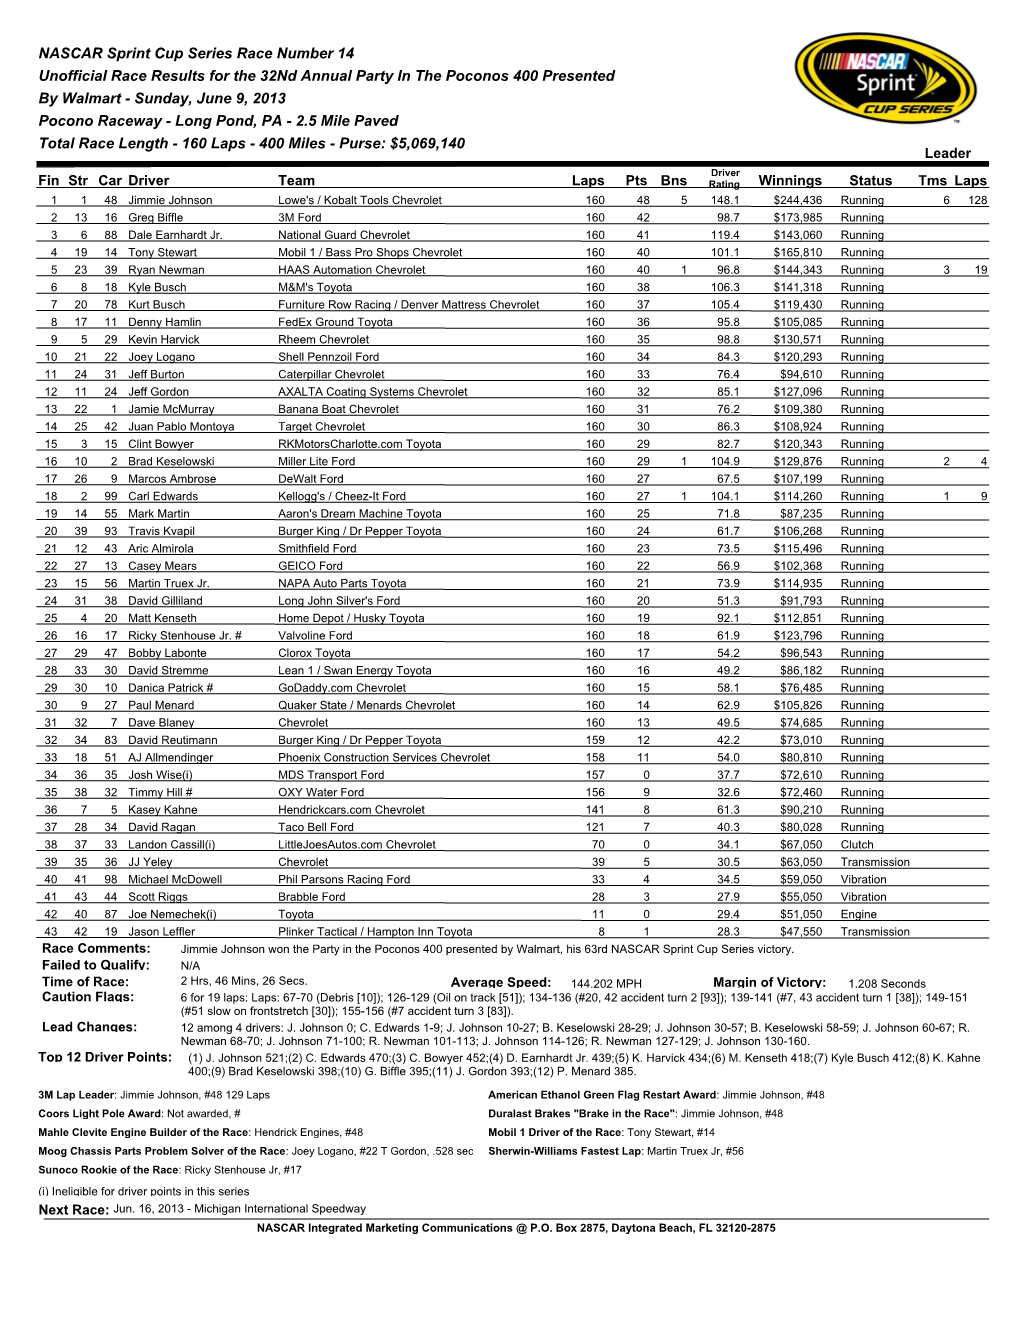 NASCAR Sprint Cup Series Race Number 14 Unofficial Race Results